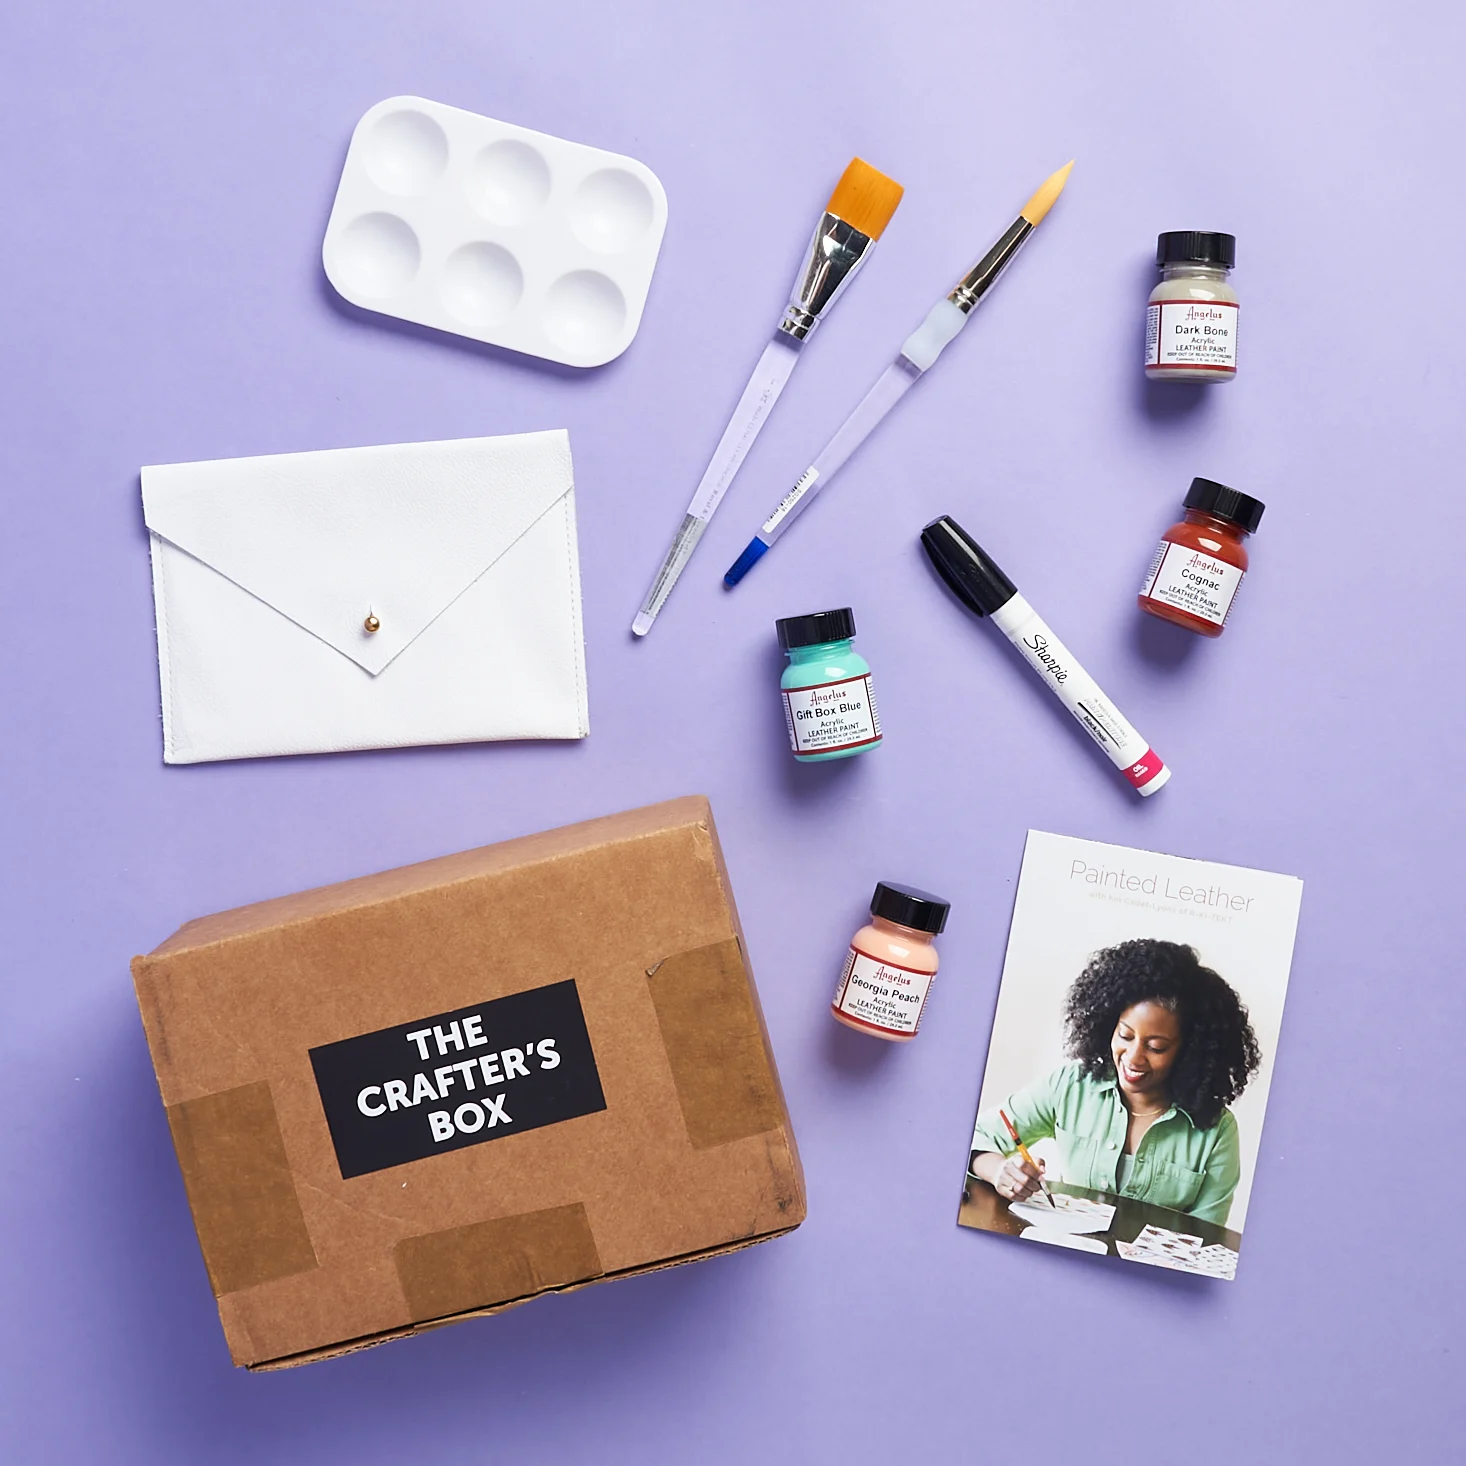 Learn a craft from start to finish, The Crafter's Box